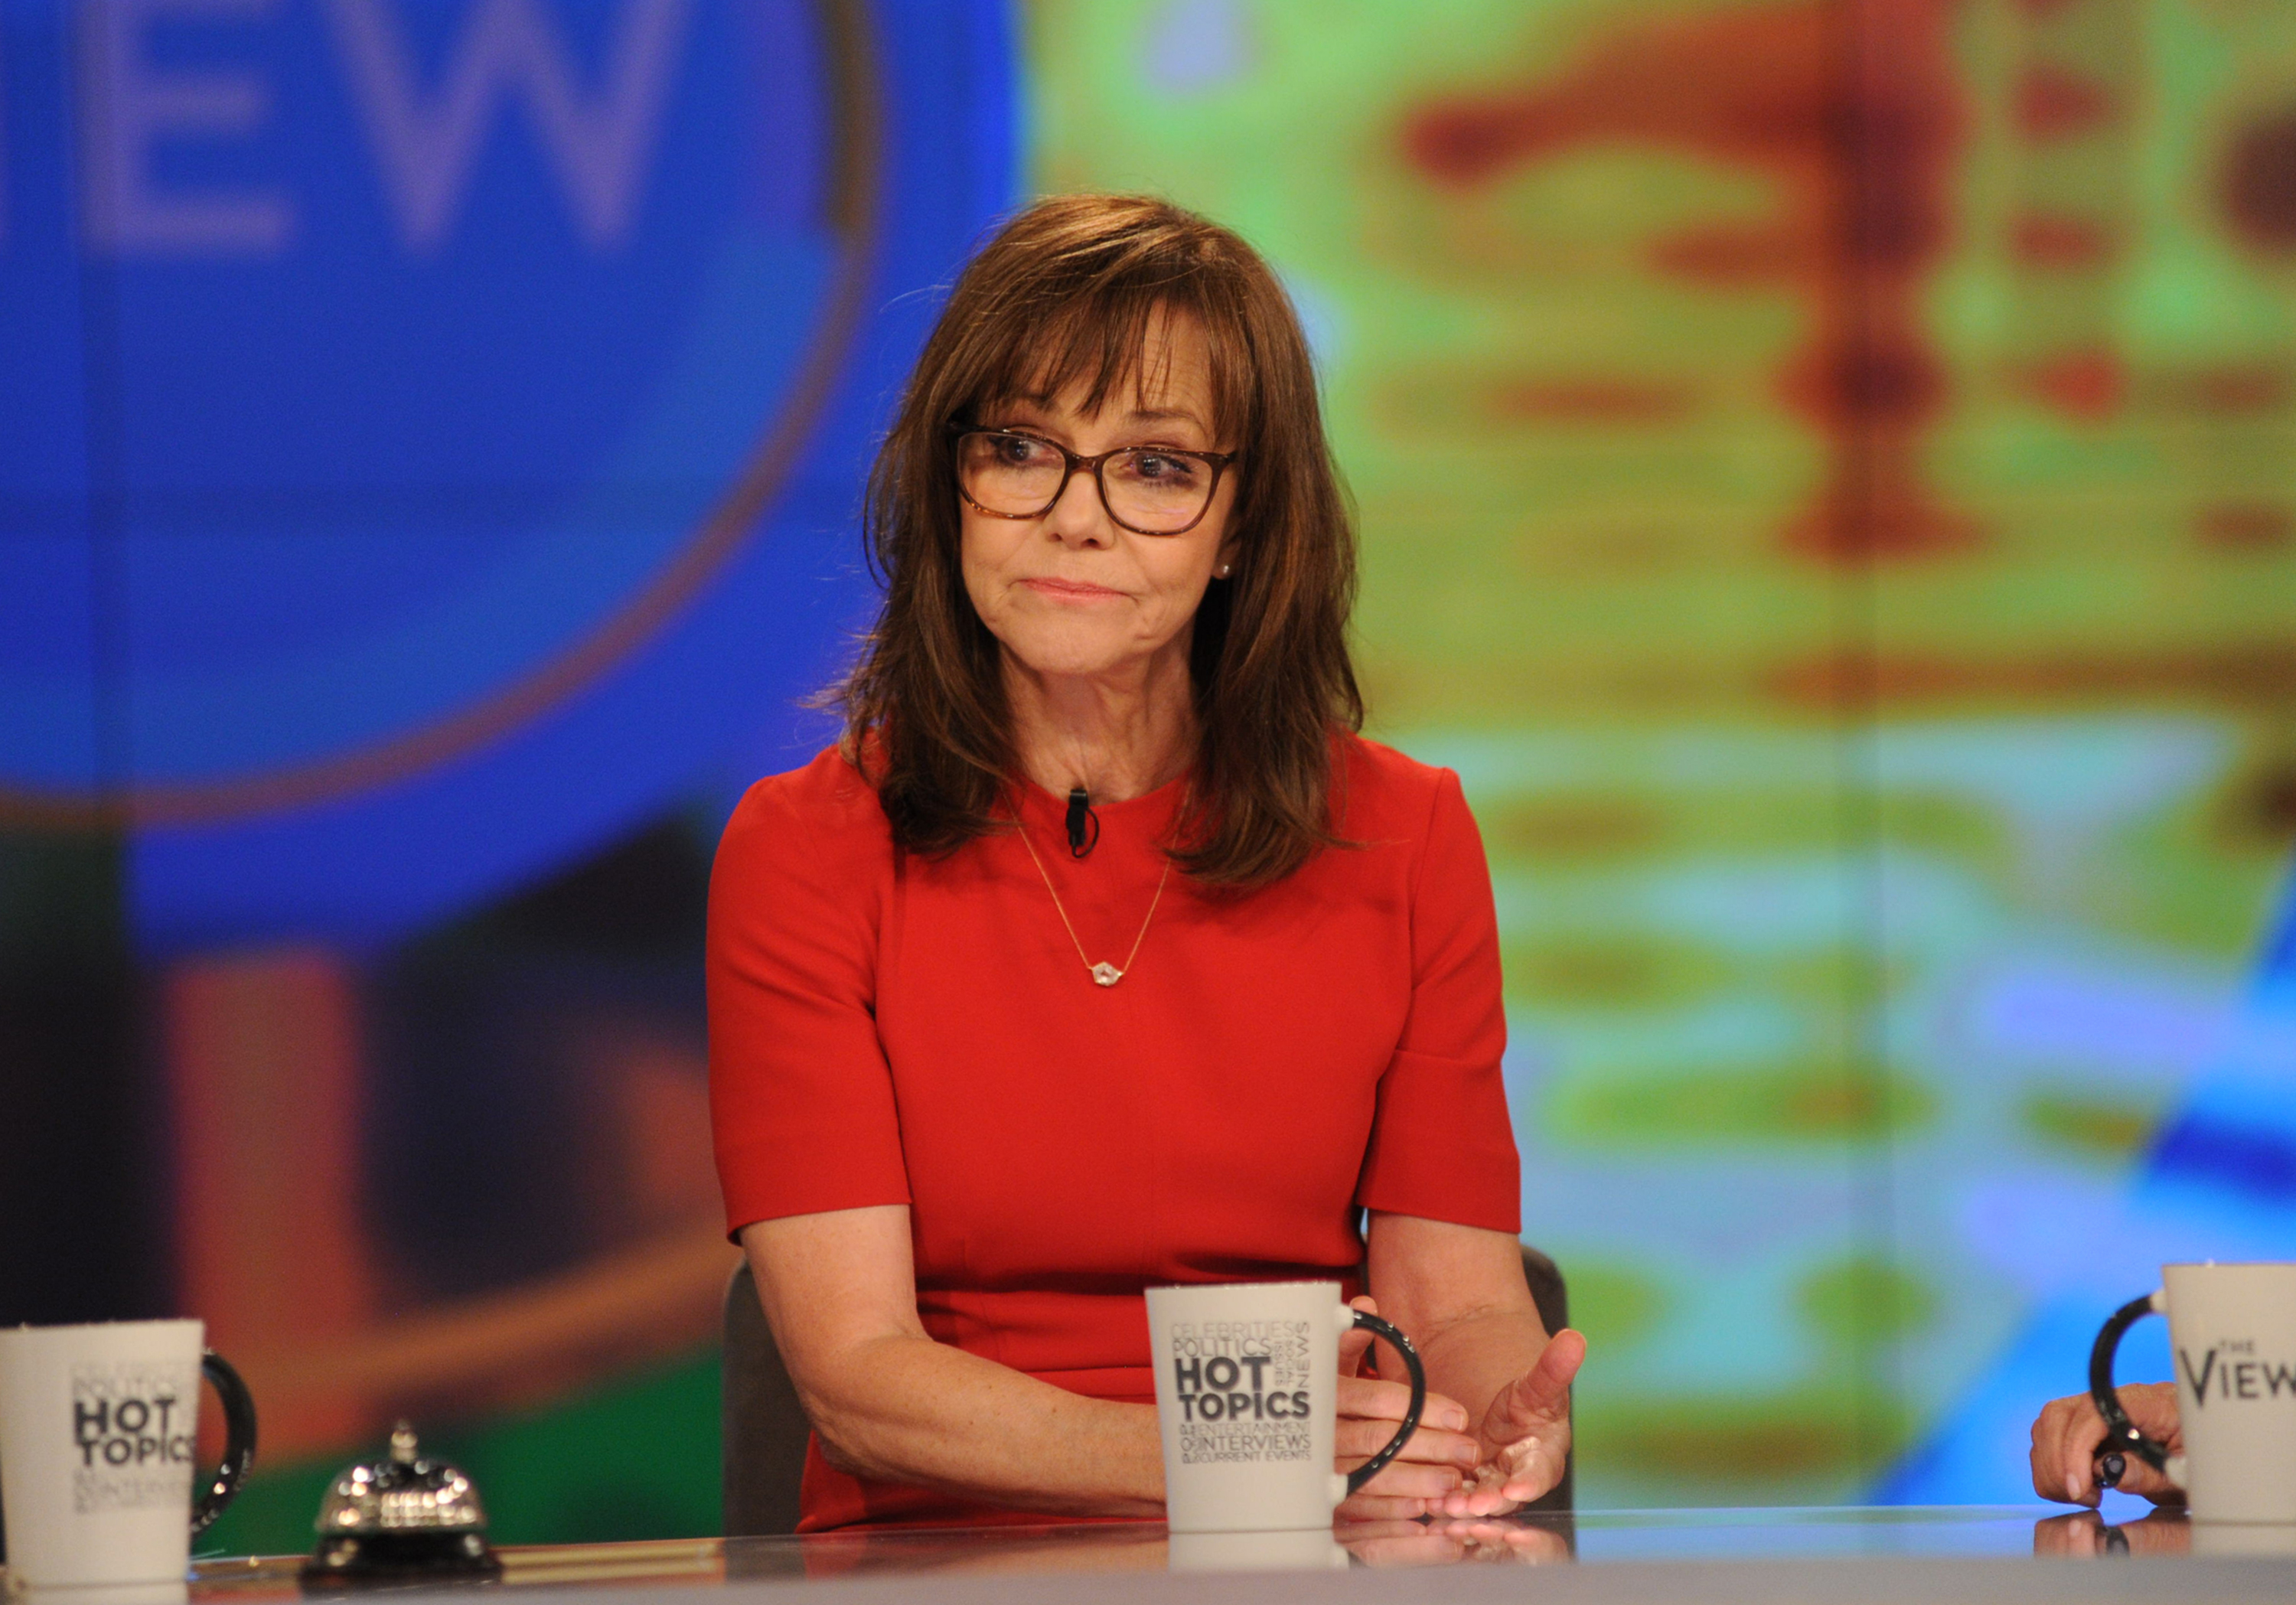 Sally Field on a season 21 episode of "The View" on September 18, 2018. | Source: Getty Images